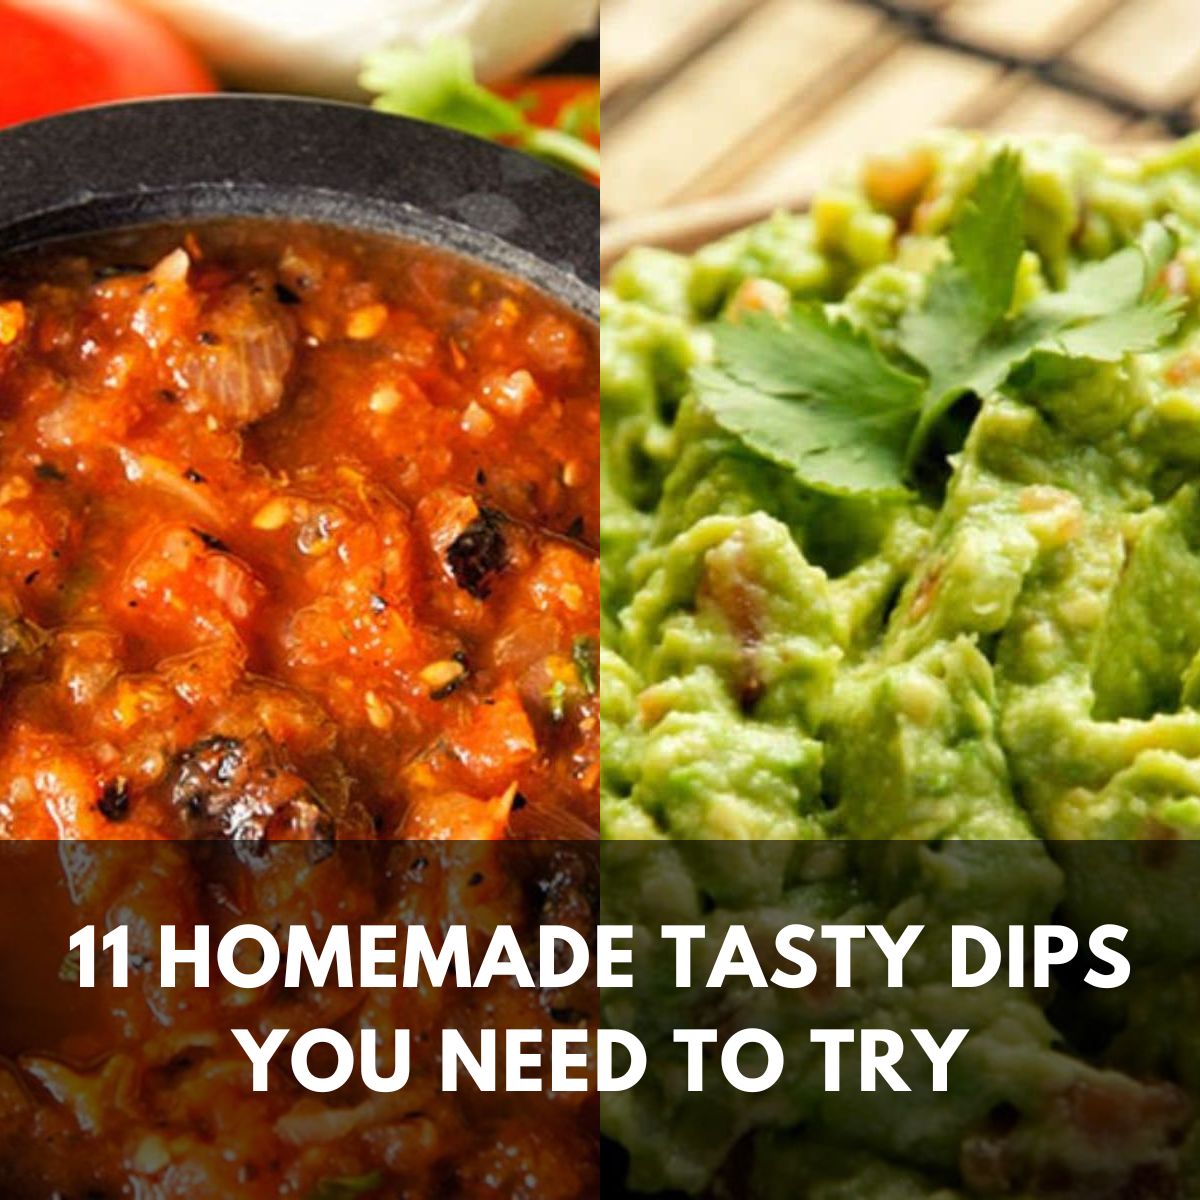 11 homemade tasty dips you need to try main